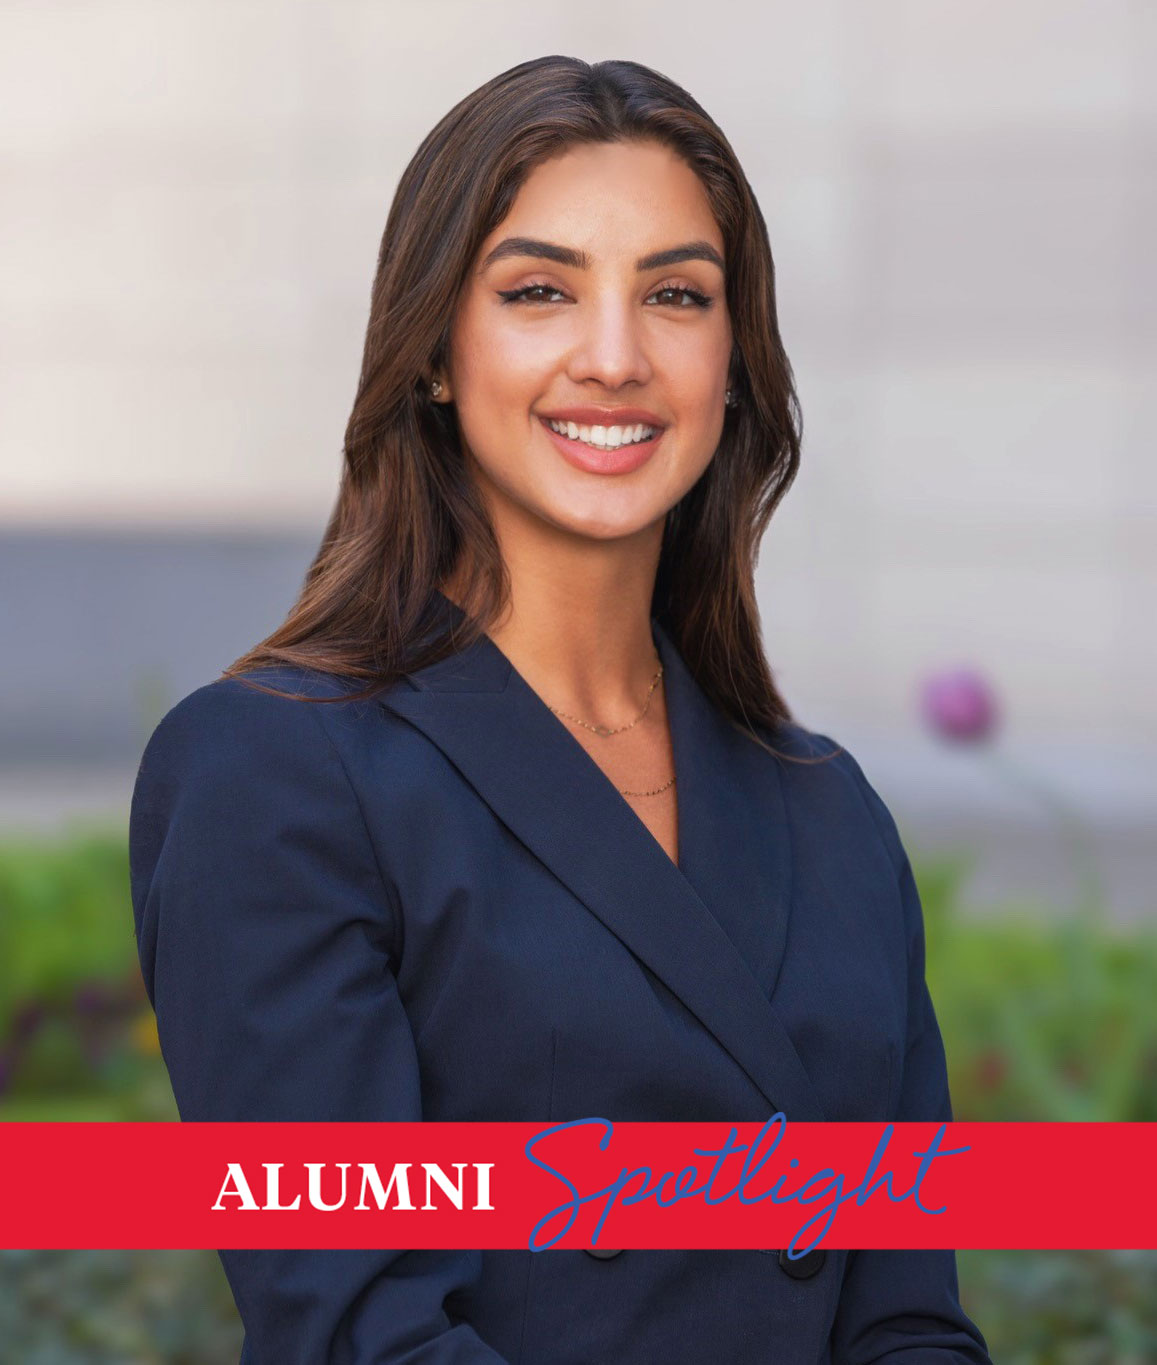 Journalism alum Saniha Aziz works as a Communications Advisor for the Federal Reserve Bank of Dallas.